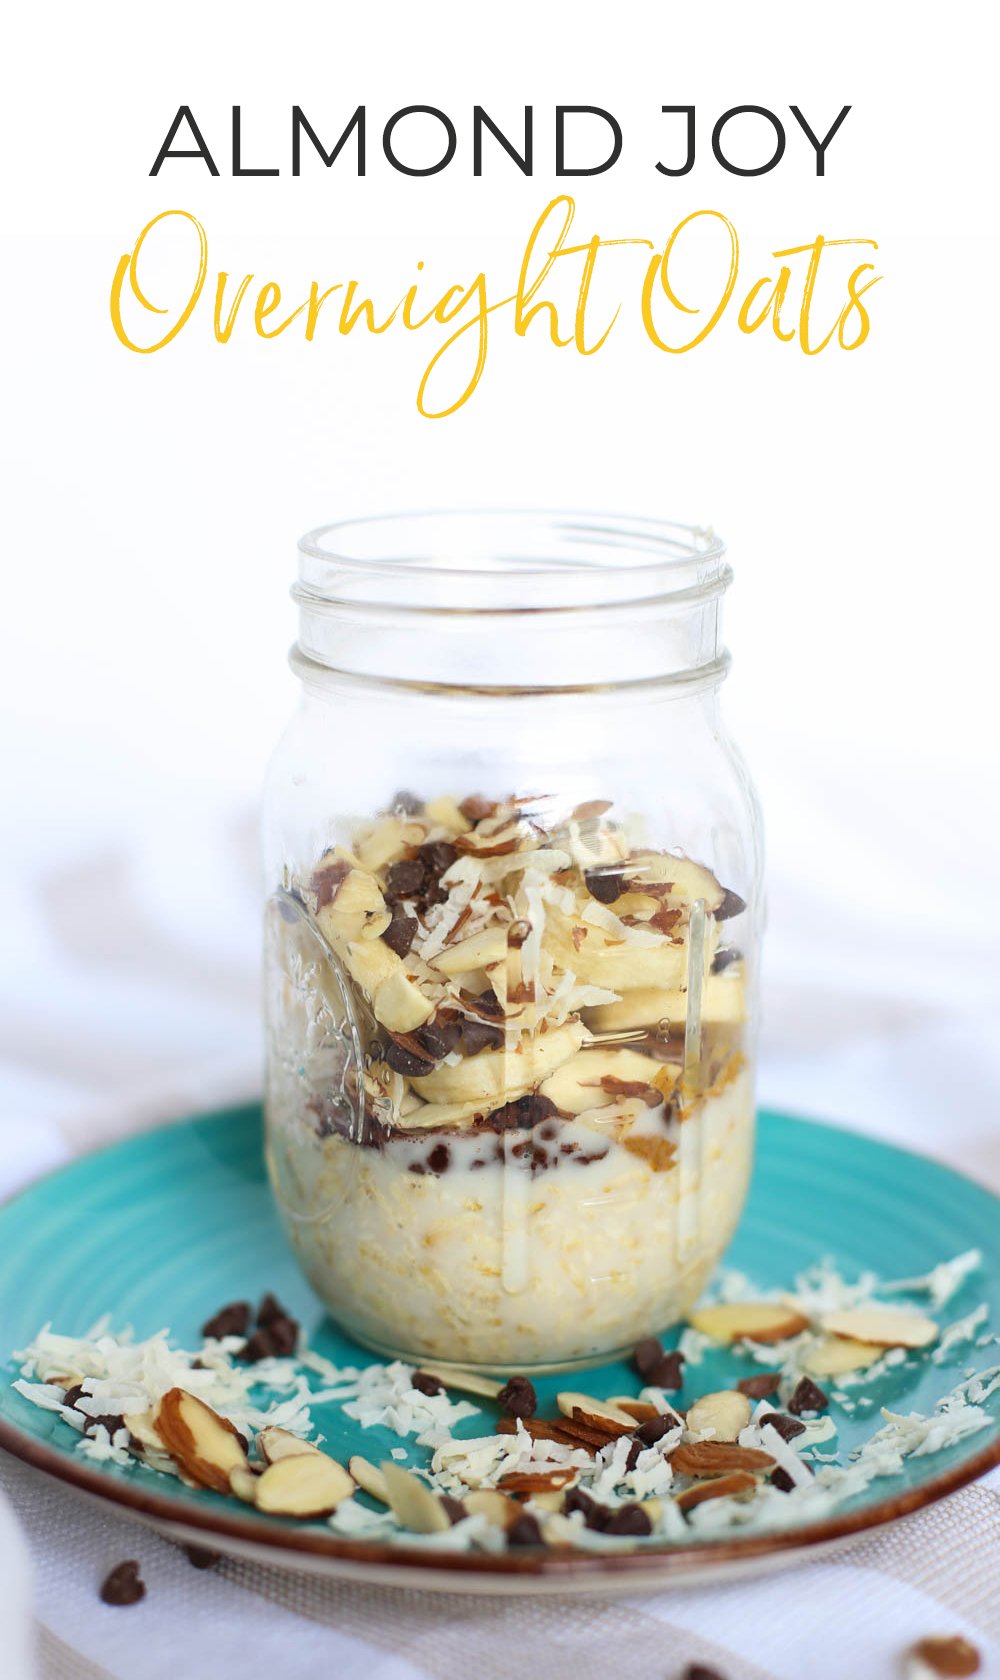 Almond Joy Overnight Oats in a mason jar on top of turquoise plate with coconut, sliced almonds, and chocolate chips scattered around.